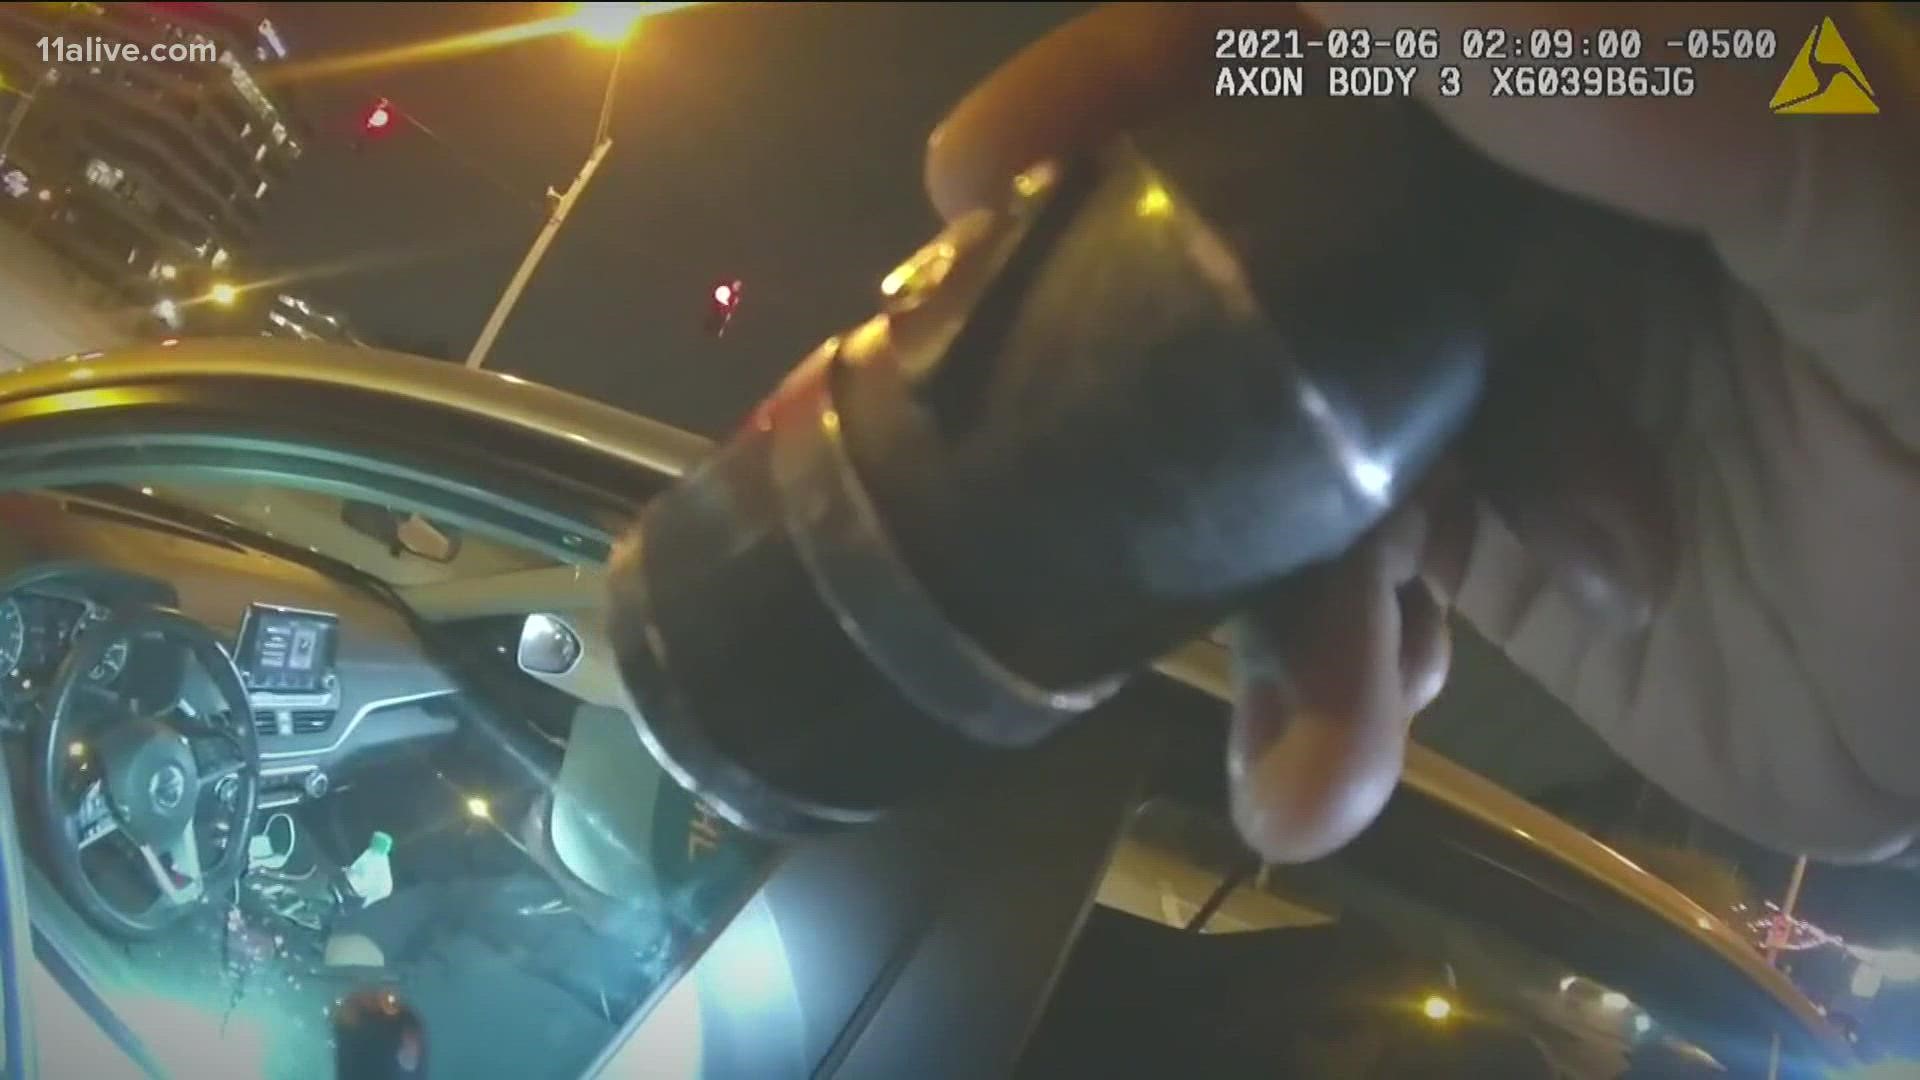 The video also shows the officer's possible split-second decision when the driver reached over to the passenger seat.